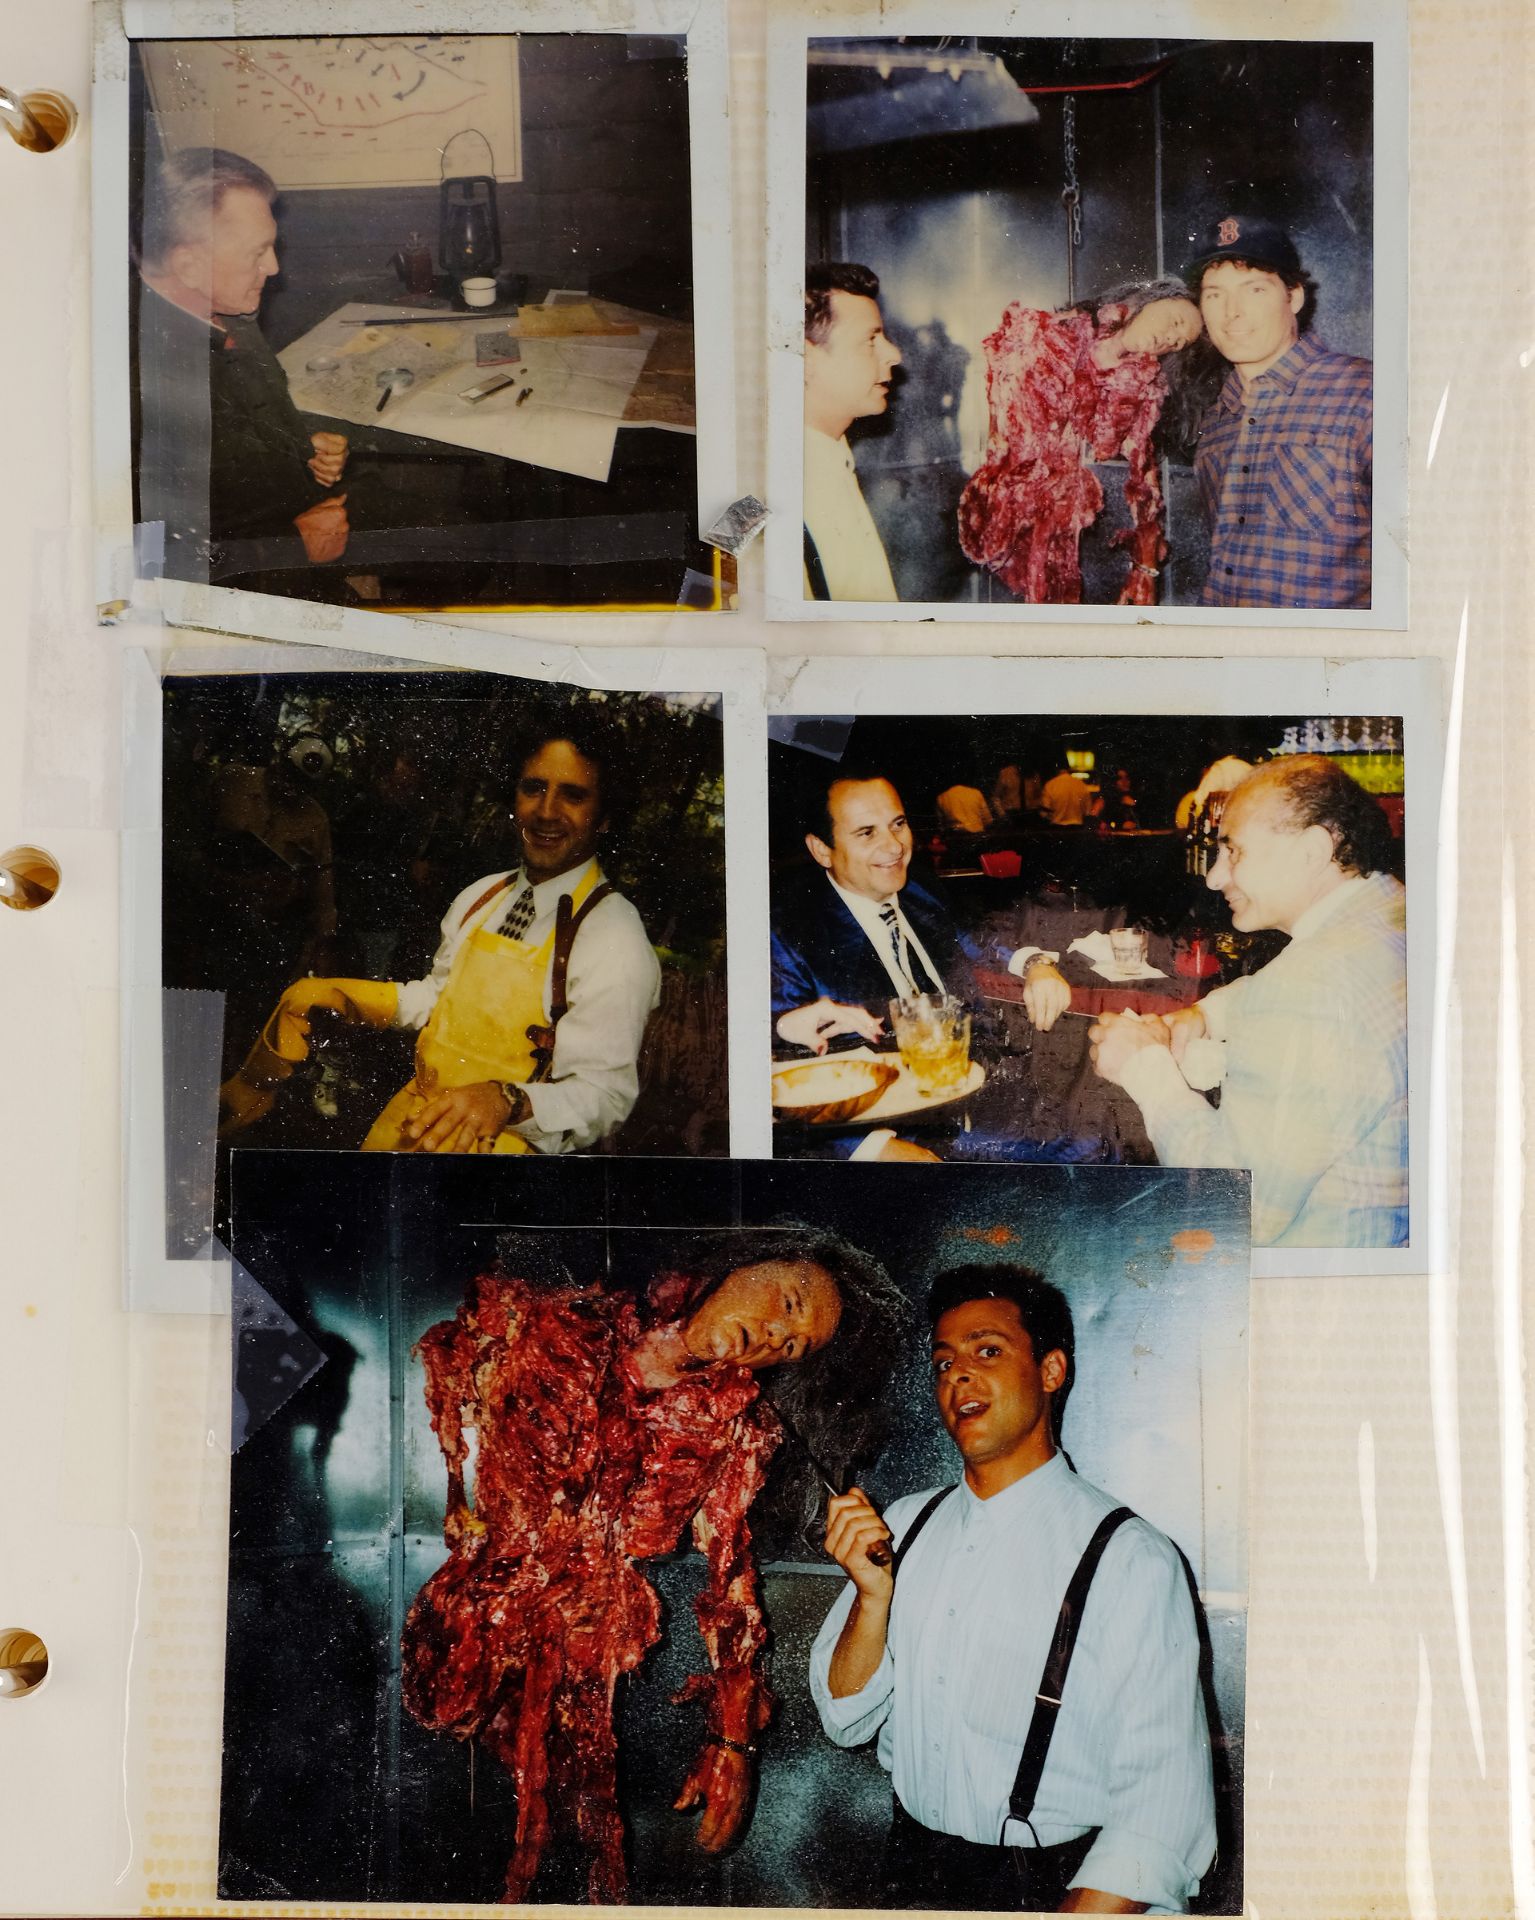 TALES FROM THE CRYPT (1989-1996) - Set of Six Continuity Photo Binders - Bild 5 aus 9